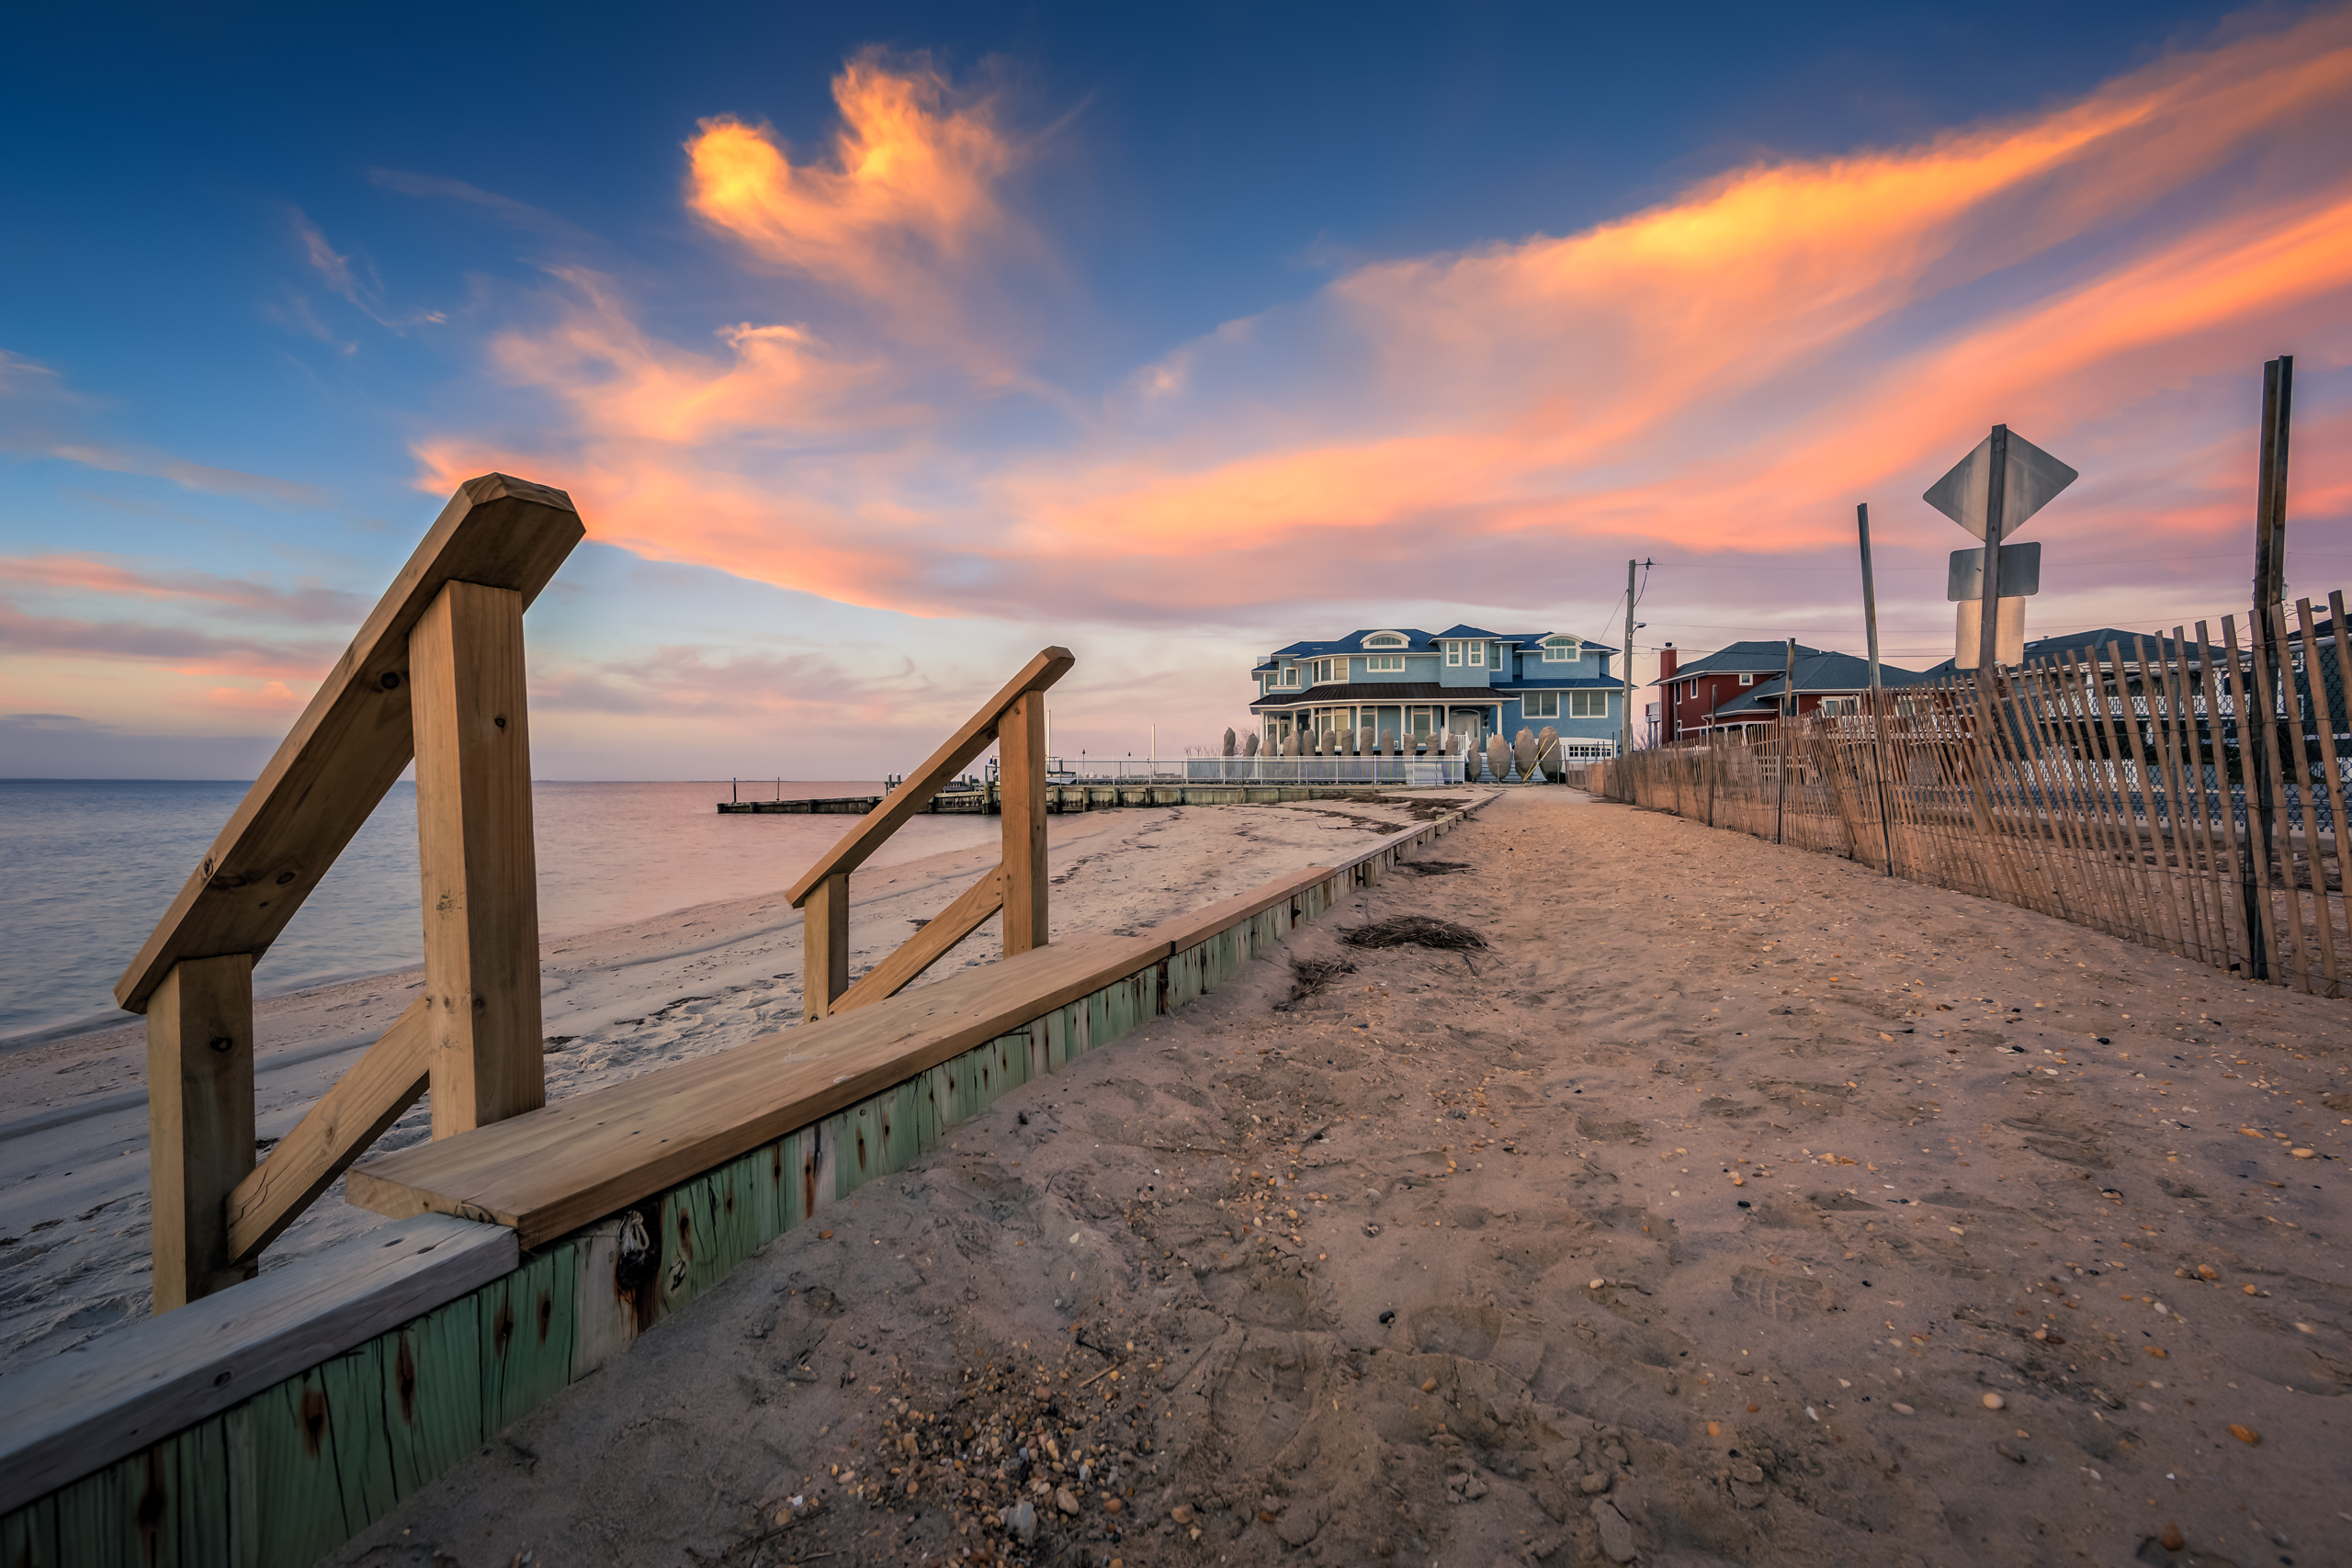 Sunset photo with colorful clouds along the Long Beach Island bayside.